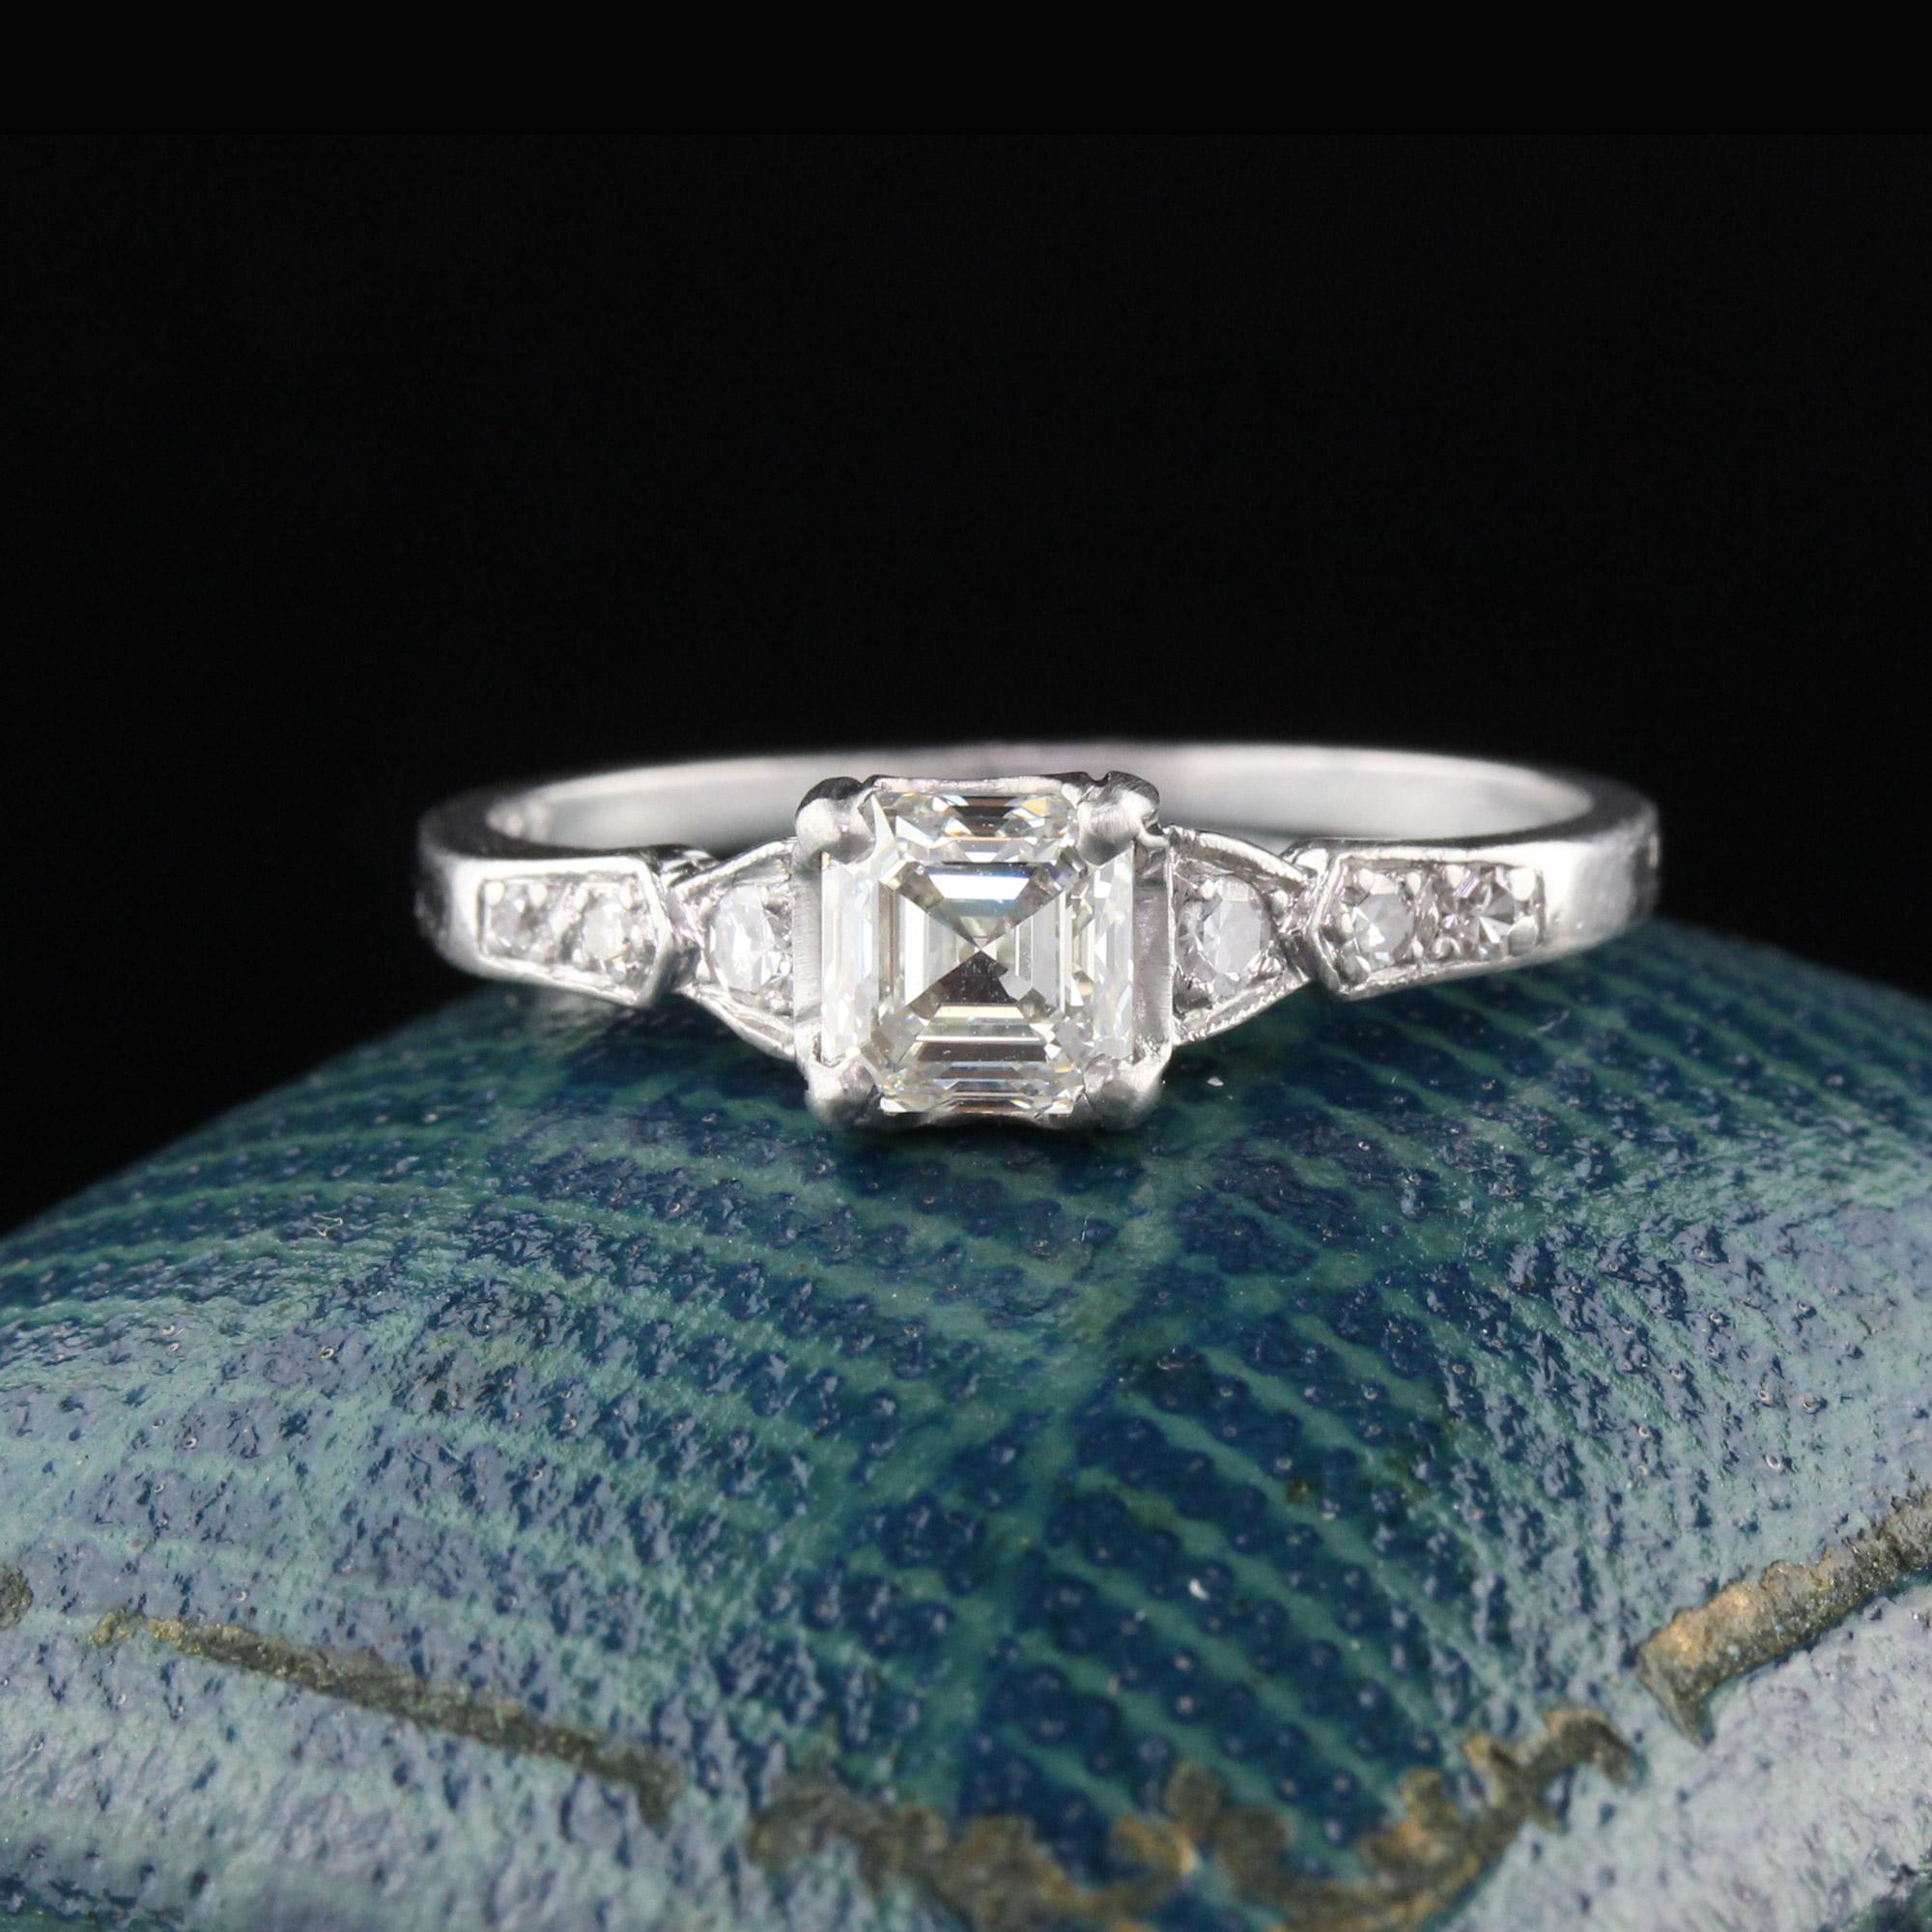 Stunning, simple, classic art deco engagement ring in platinum with a asscher cut diamond center, and 3 old cut round diamonds on either side of the shank.

#R0190

Metal: Platinum

Weight: 2.9 Grams

Center Diamond Weight: 0.70 ct Asscher cut (EGL